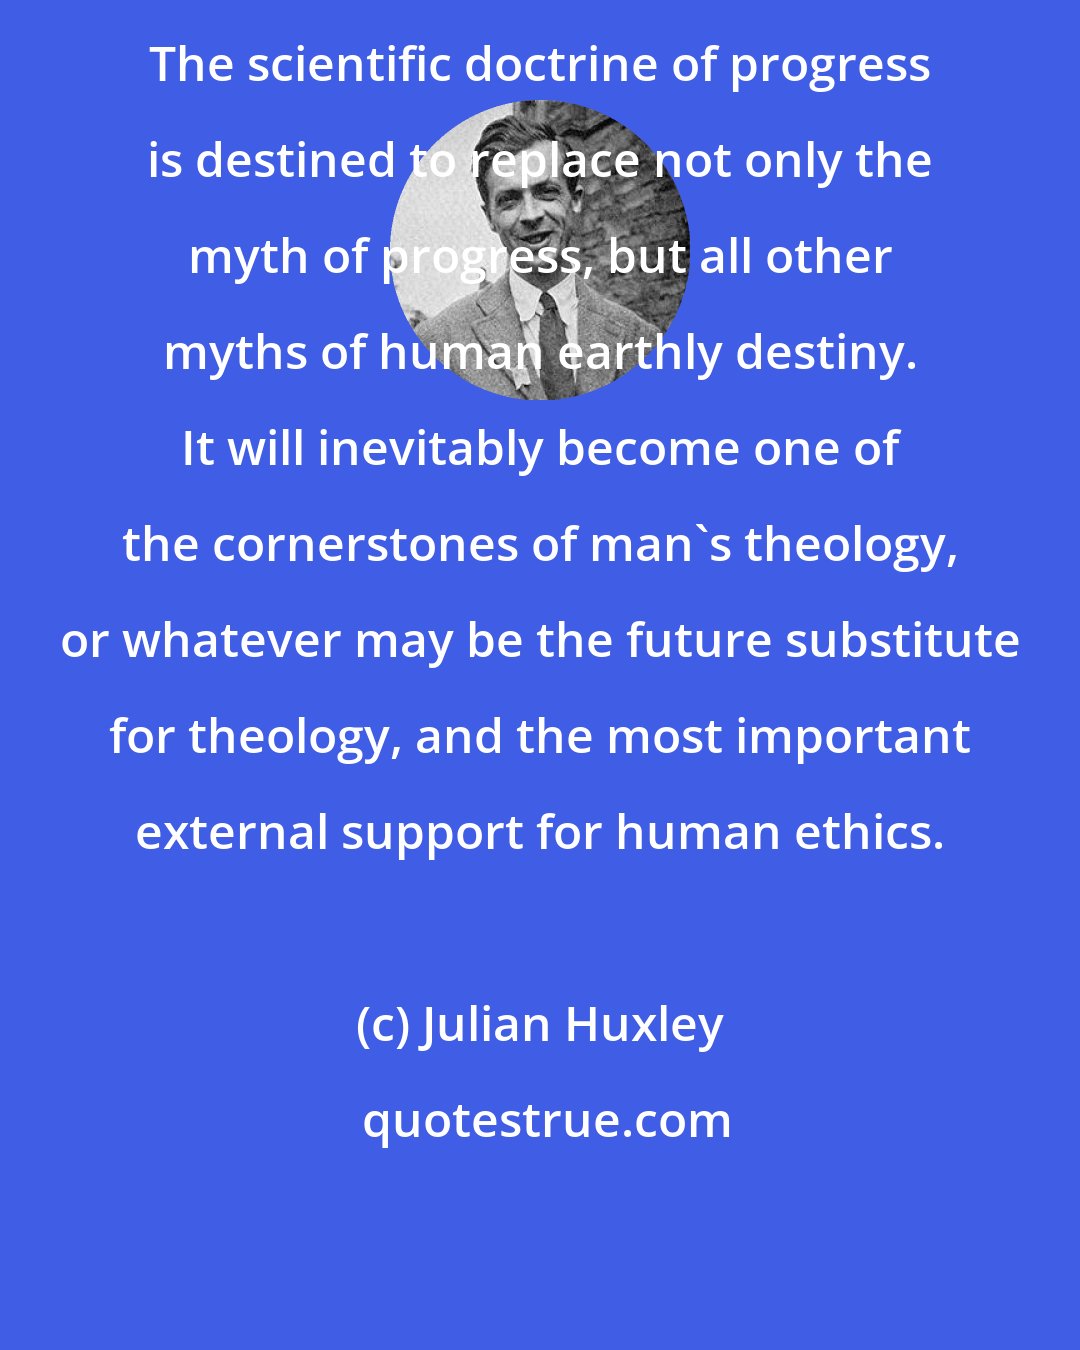 Julian Huxley: The scientific doctrine of progress is destined to replace not only the myth of progress, but all other myths of human earthly destiny. It will inevitably become one of the cornerstones of man's theology, or whatever may be the future substitute for theology, and the most important external support for human ethics.